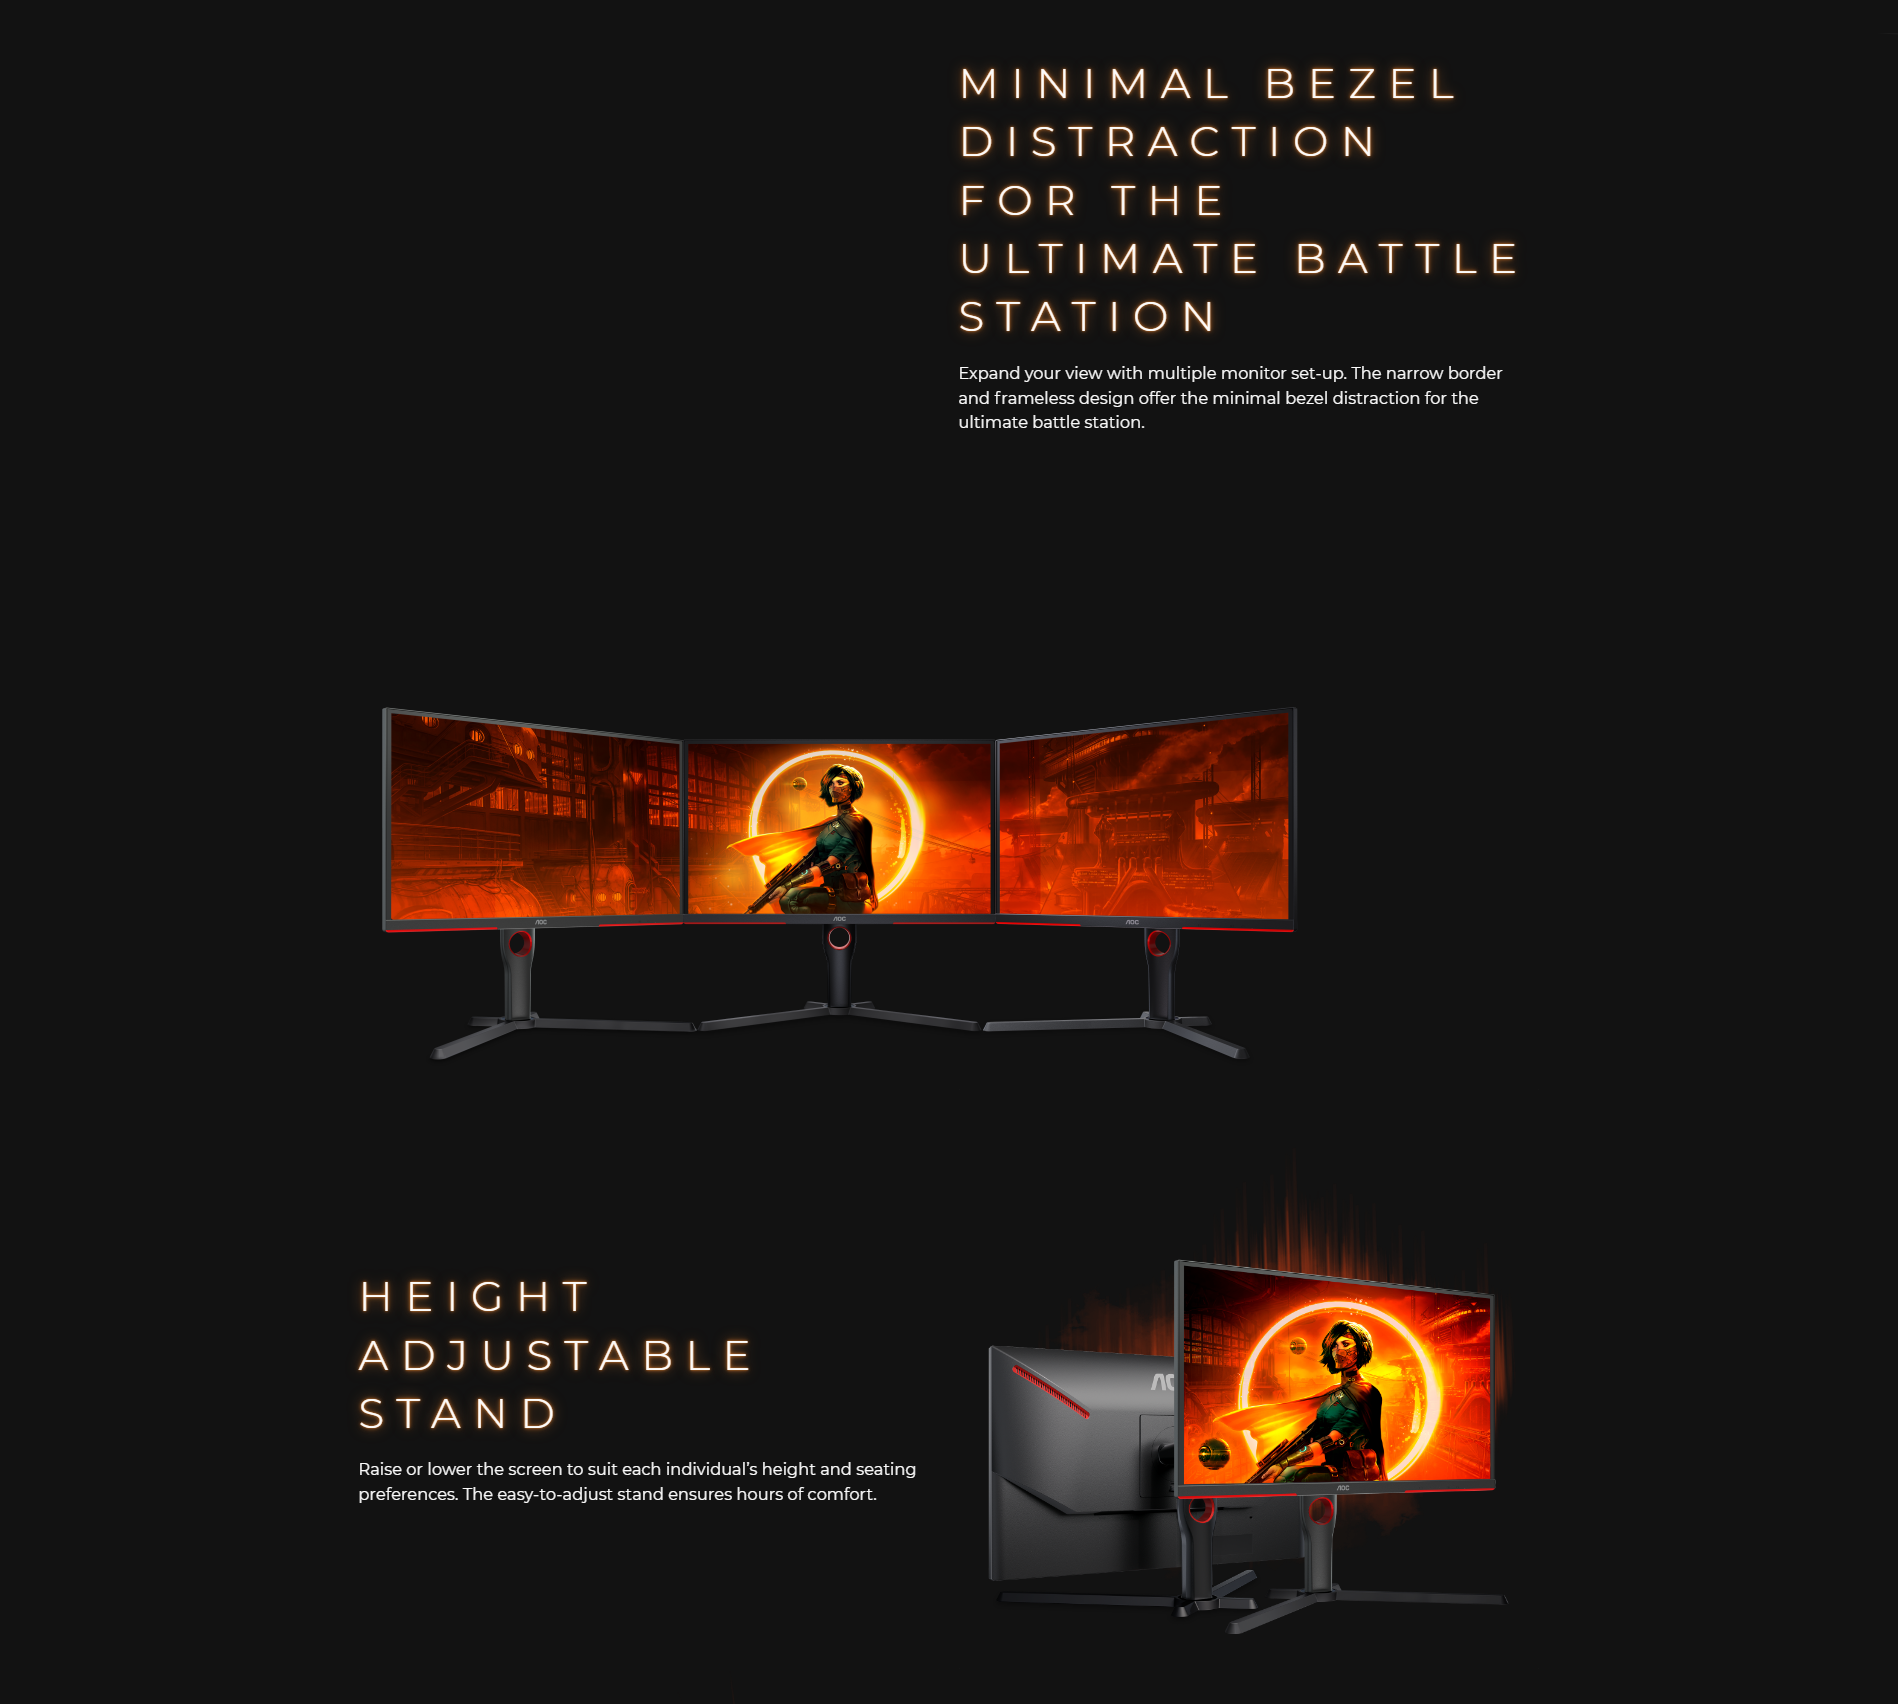 A large marketing image providing additional information about the product AOC Gaming 25G3ZM 24.5" FHD 240Hz VA Monitor - Additional alt info not provided